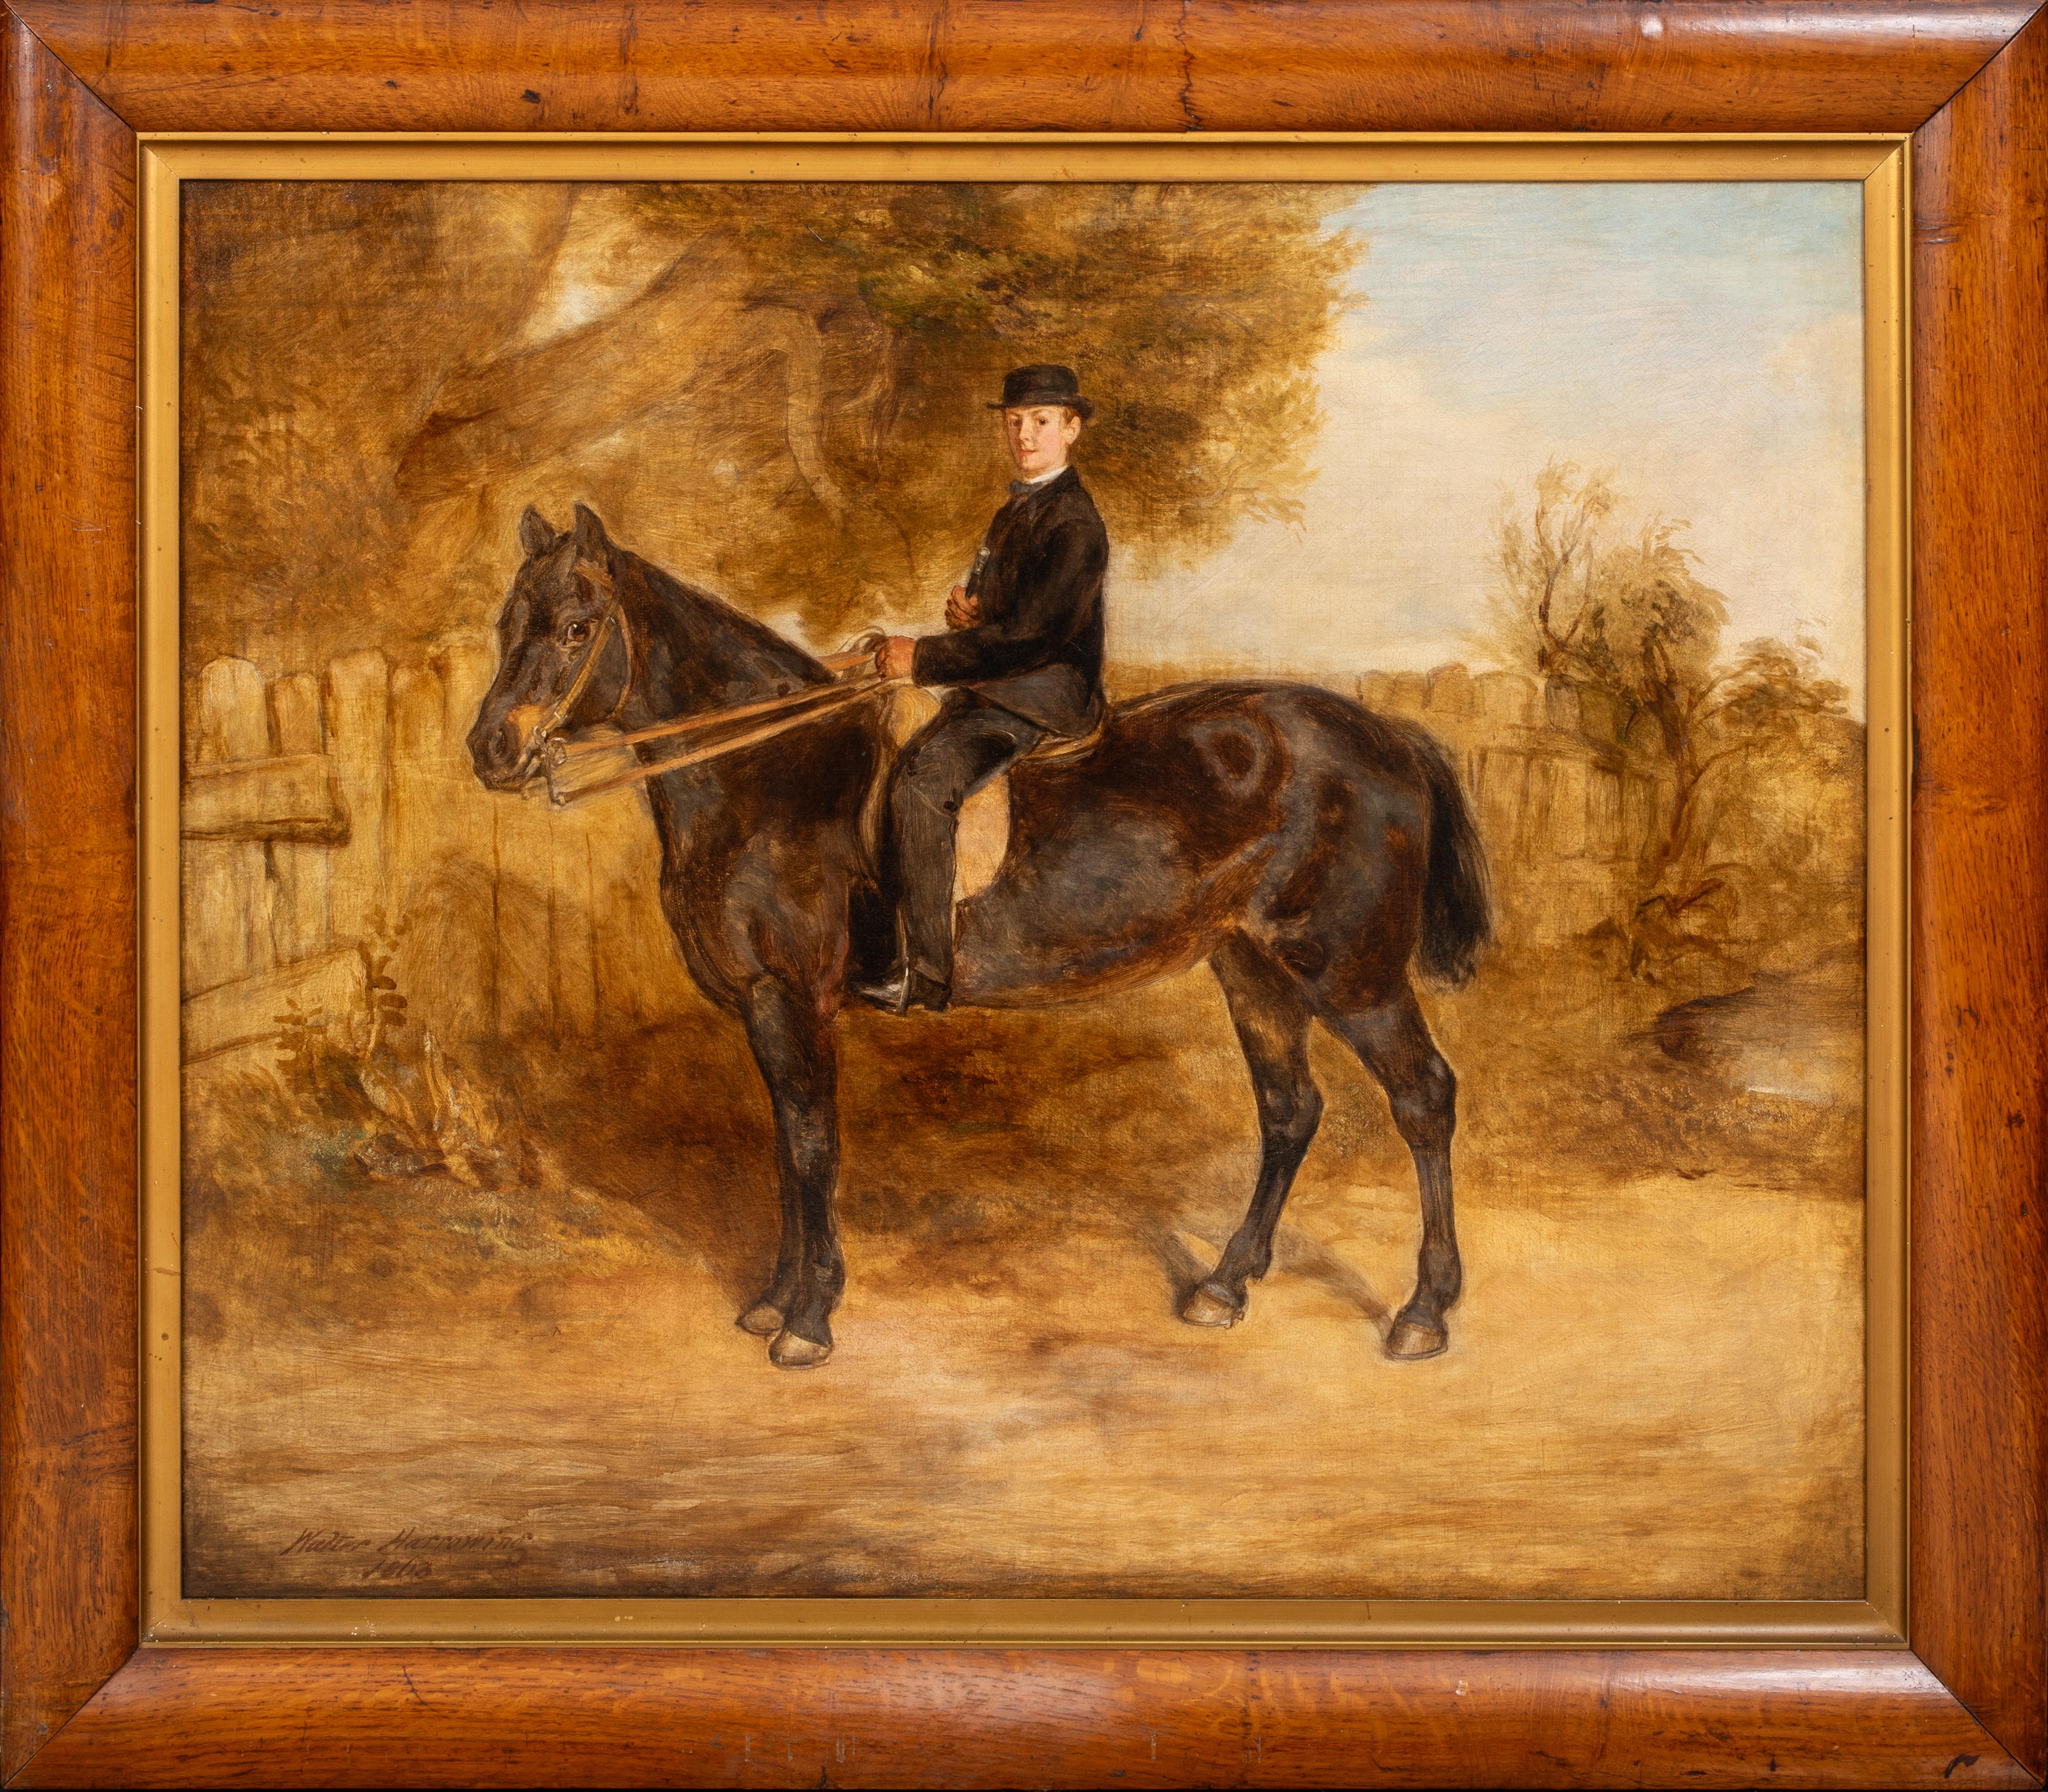 Unknown Portrait Painting - Portrait Of A Boy & His Horse, 19th Century   Walter Harrowing (1838-1913)